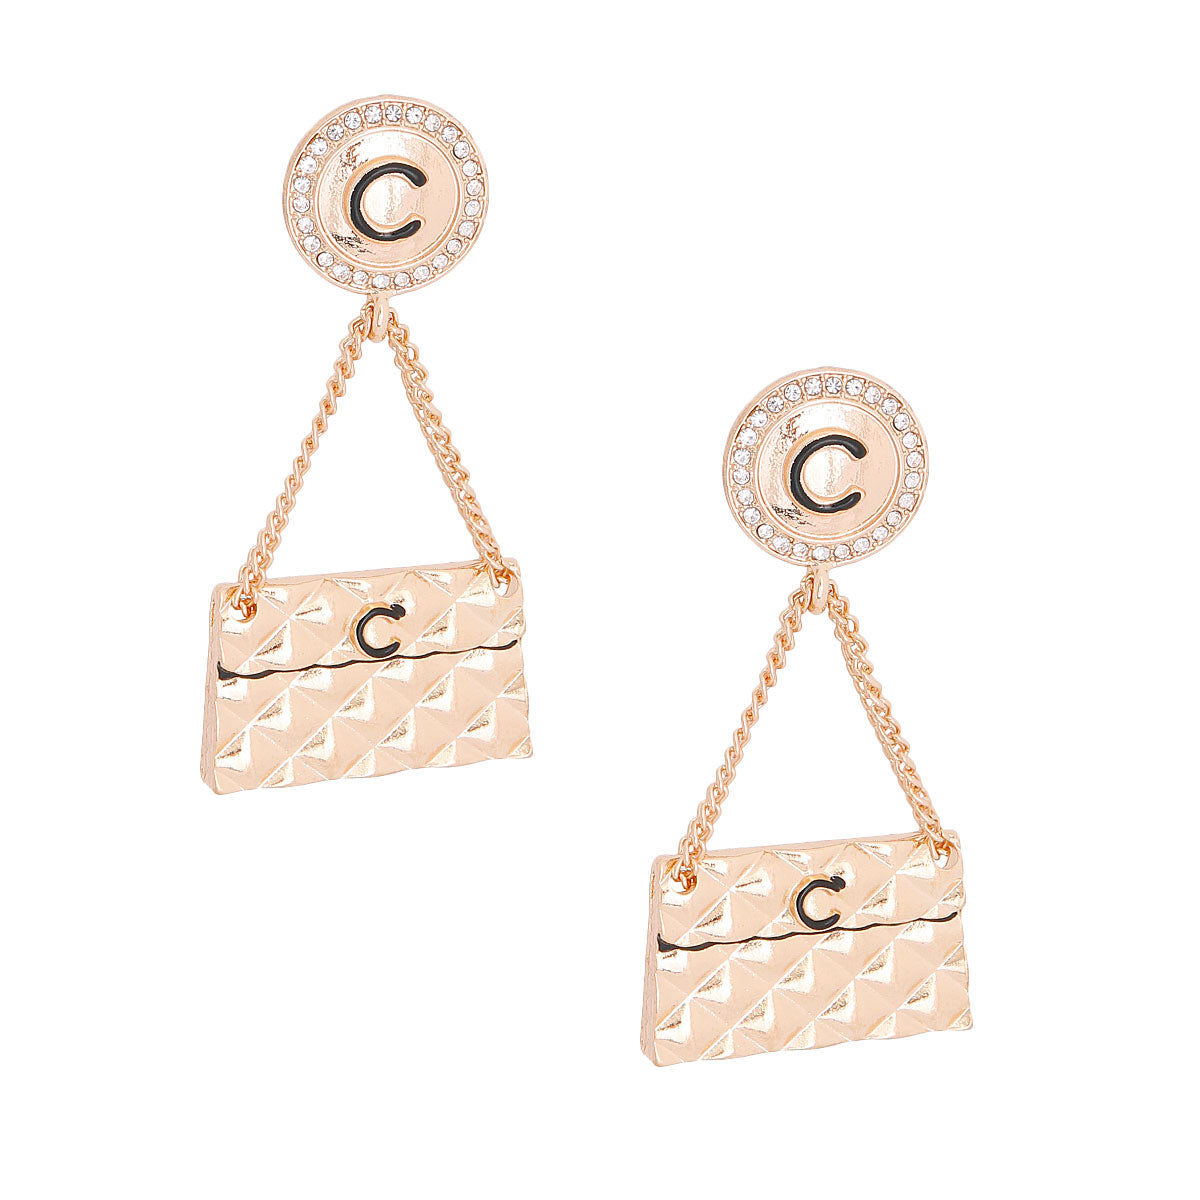 Quilted Bag Gold Earrings